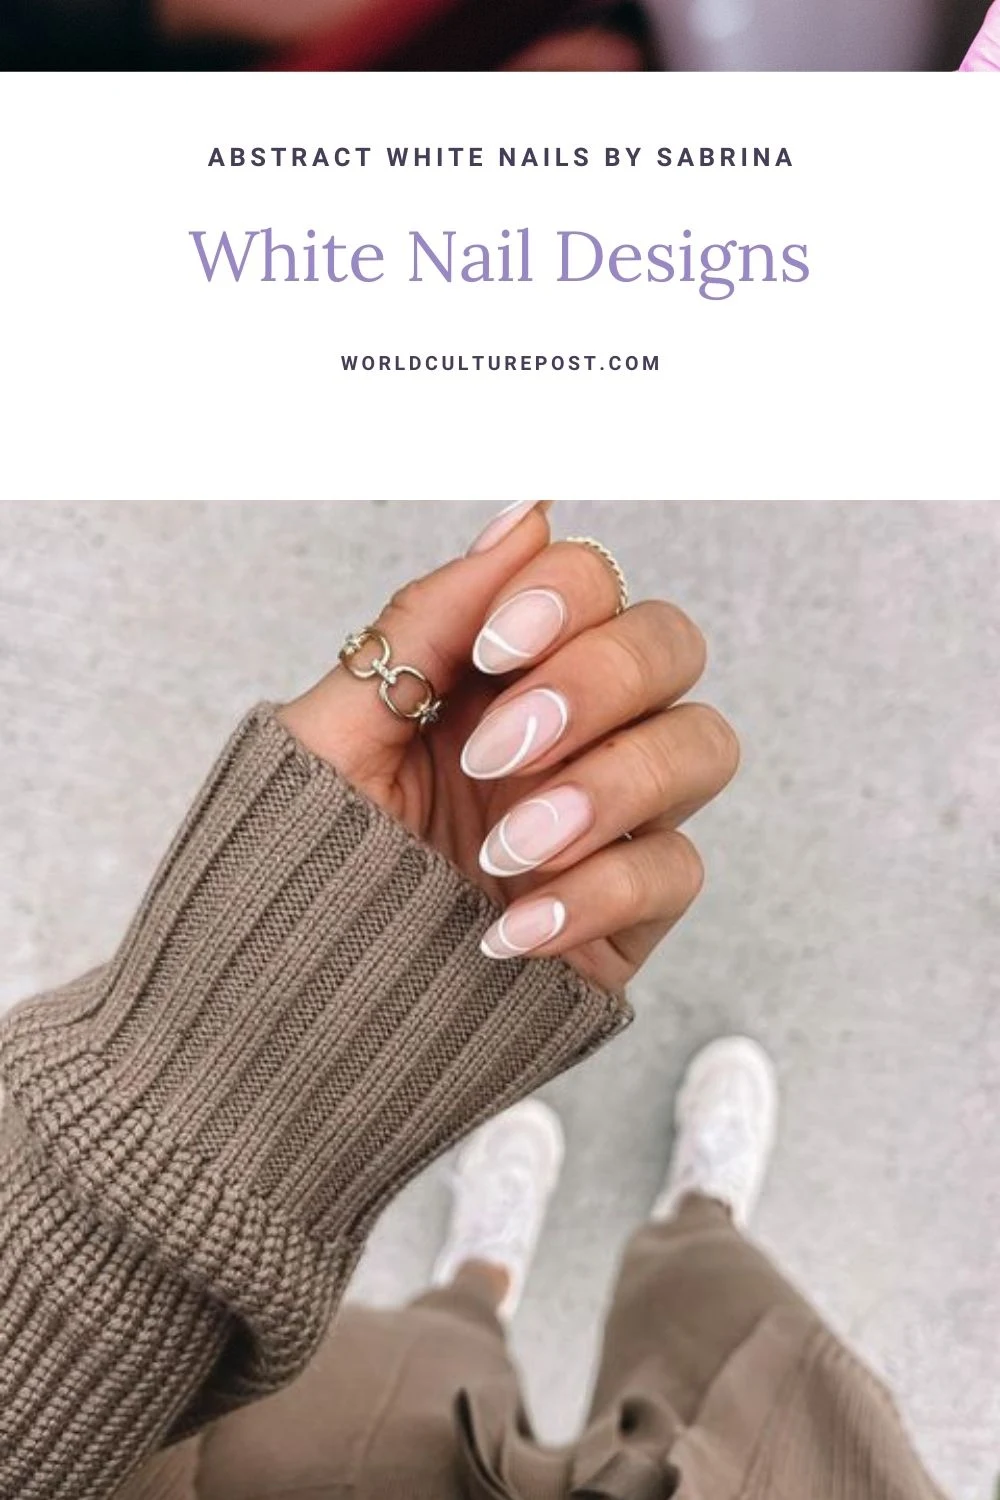 50 White Nail Ideas Perfect for Your Mani!